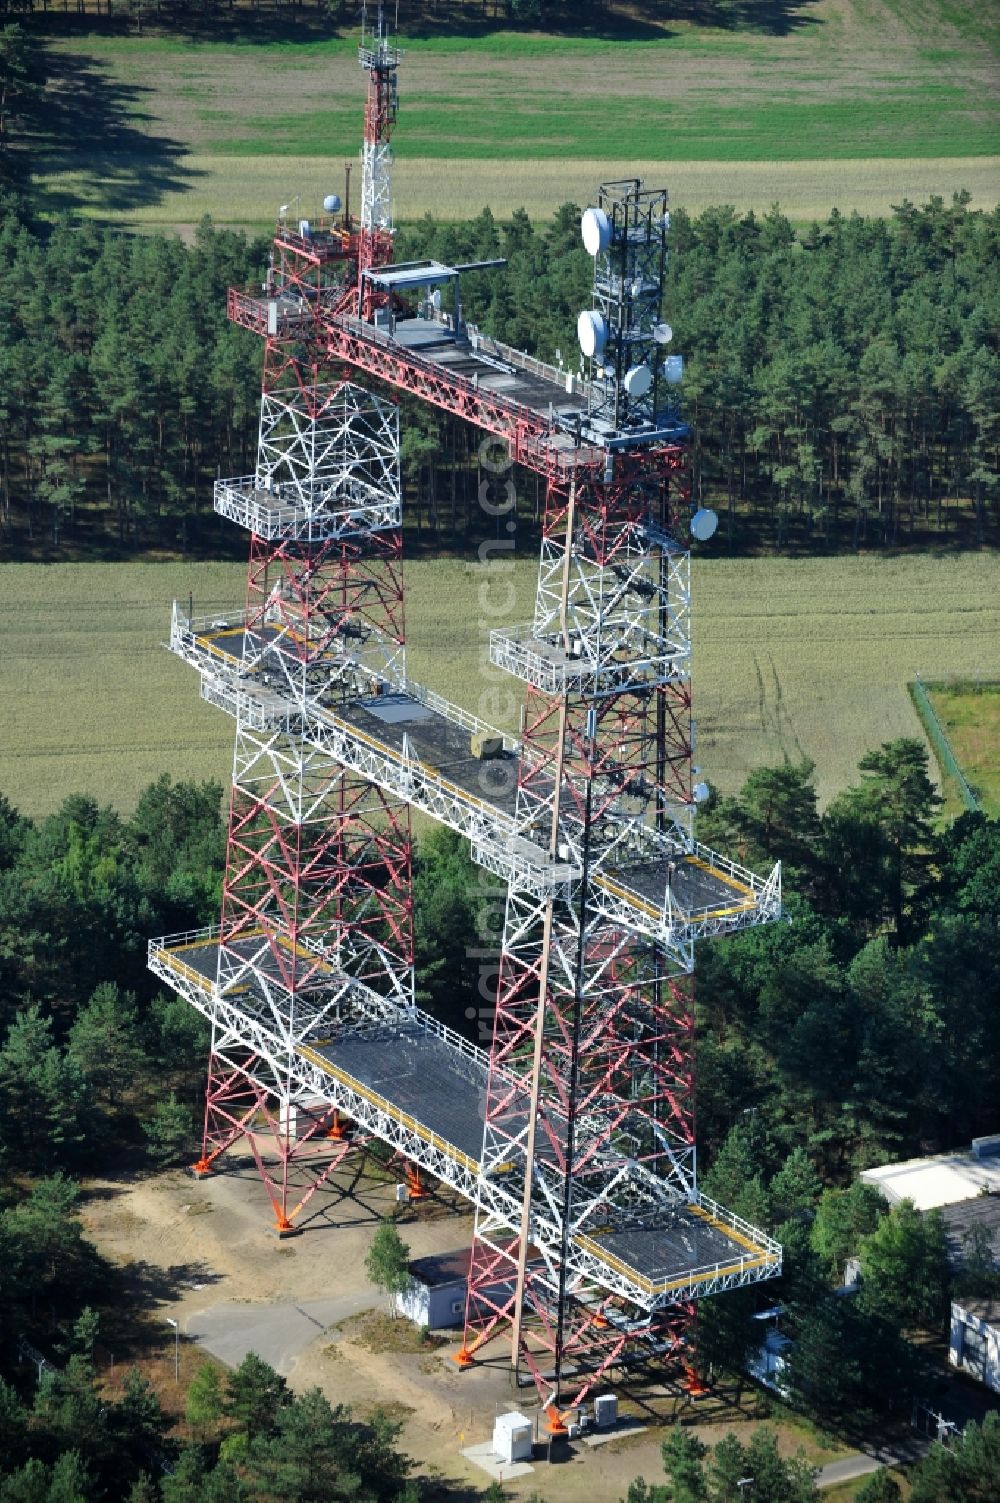 Aerial photograph Gusborn - View of the telecommunications tower Torii Tower near Gusborn in Lower Saxony. The 1972 built steel lattice tower is designed as a twin-tower and was made ??in the USA. While it originally served as a listening post, it is now an antenna support for public safety and mobile phones